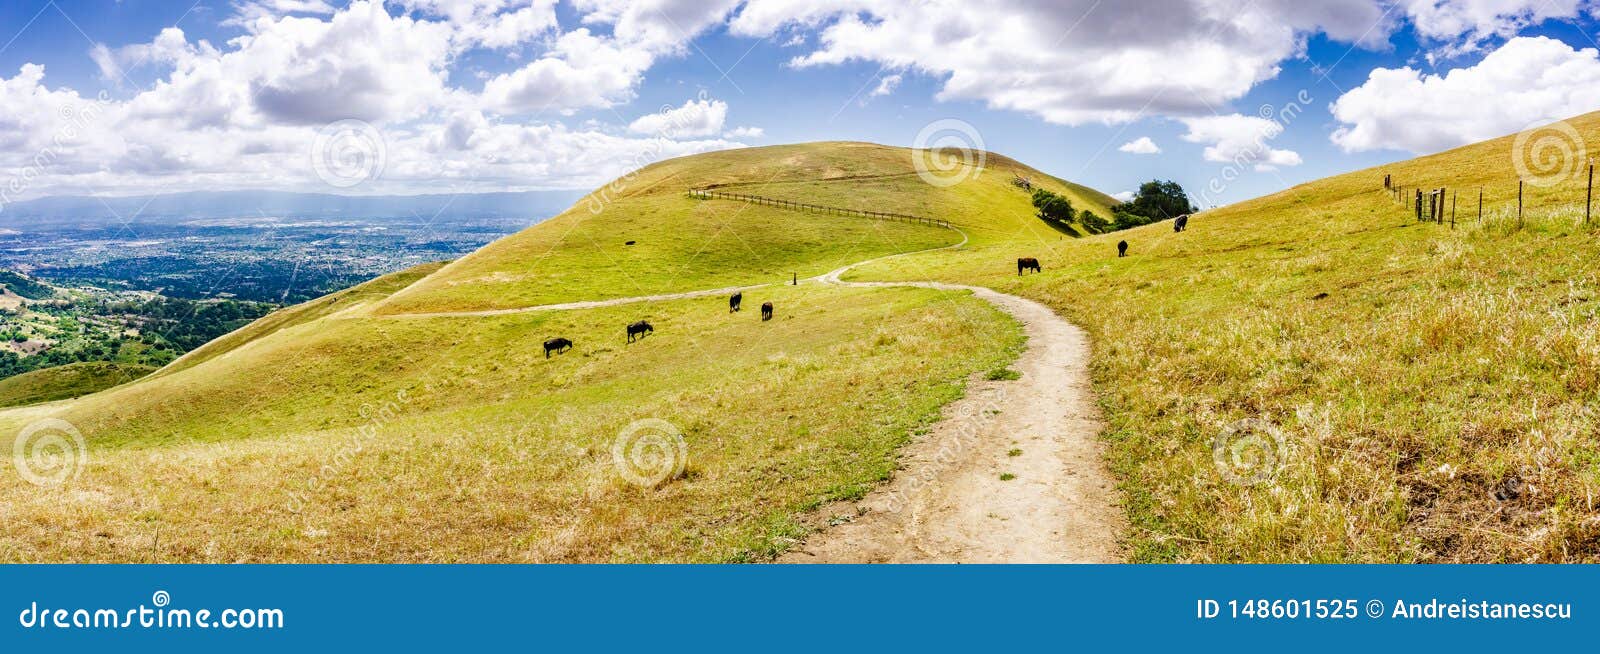 hiking trail through the hills of south san francisco bay area; cattle grazing on the hillsides, san jose visible in the